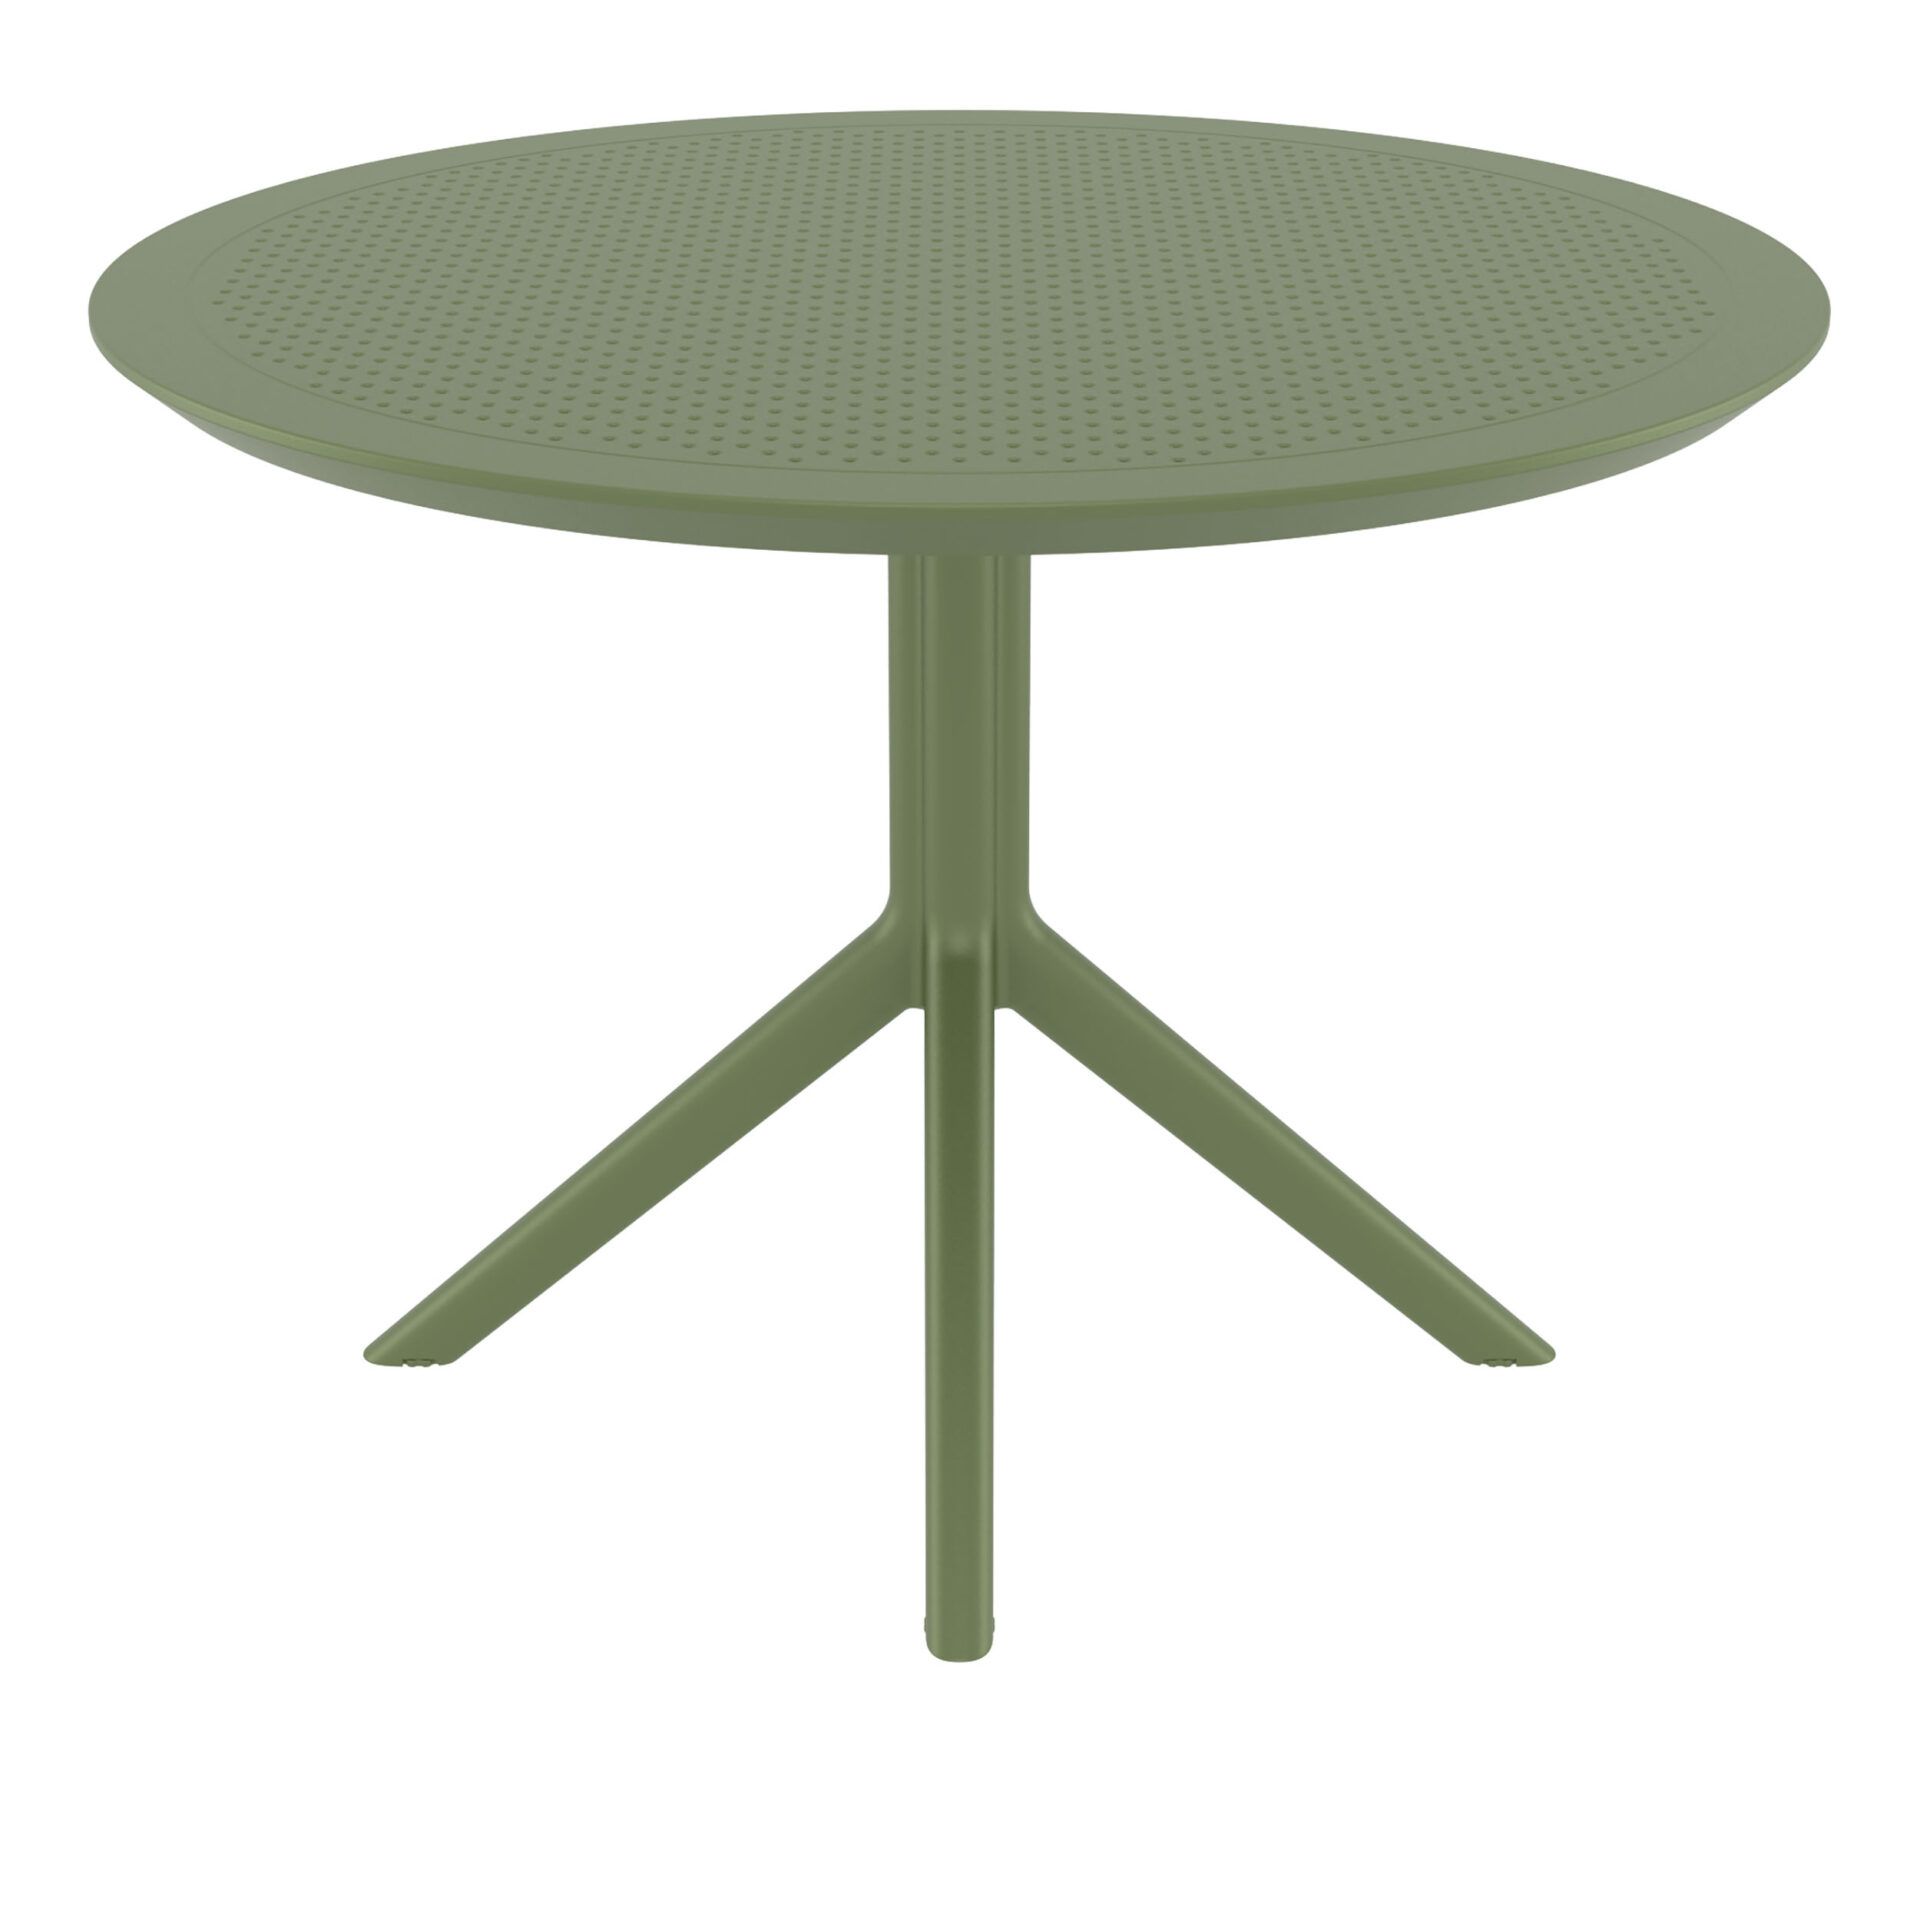 015 sky table 105 olive green side